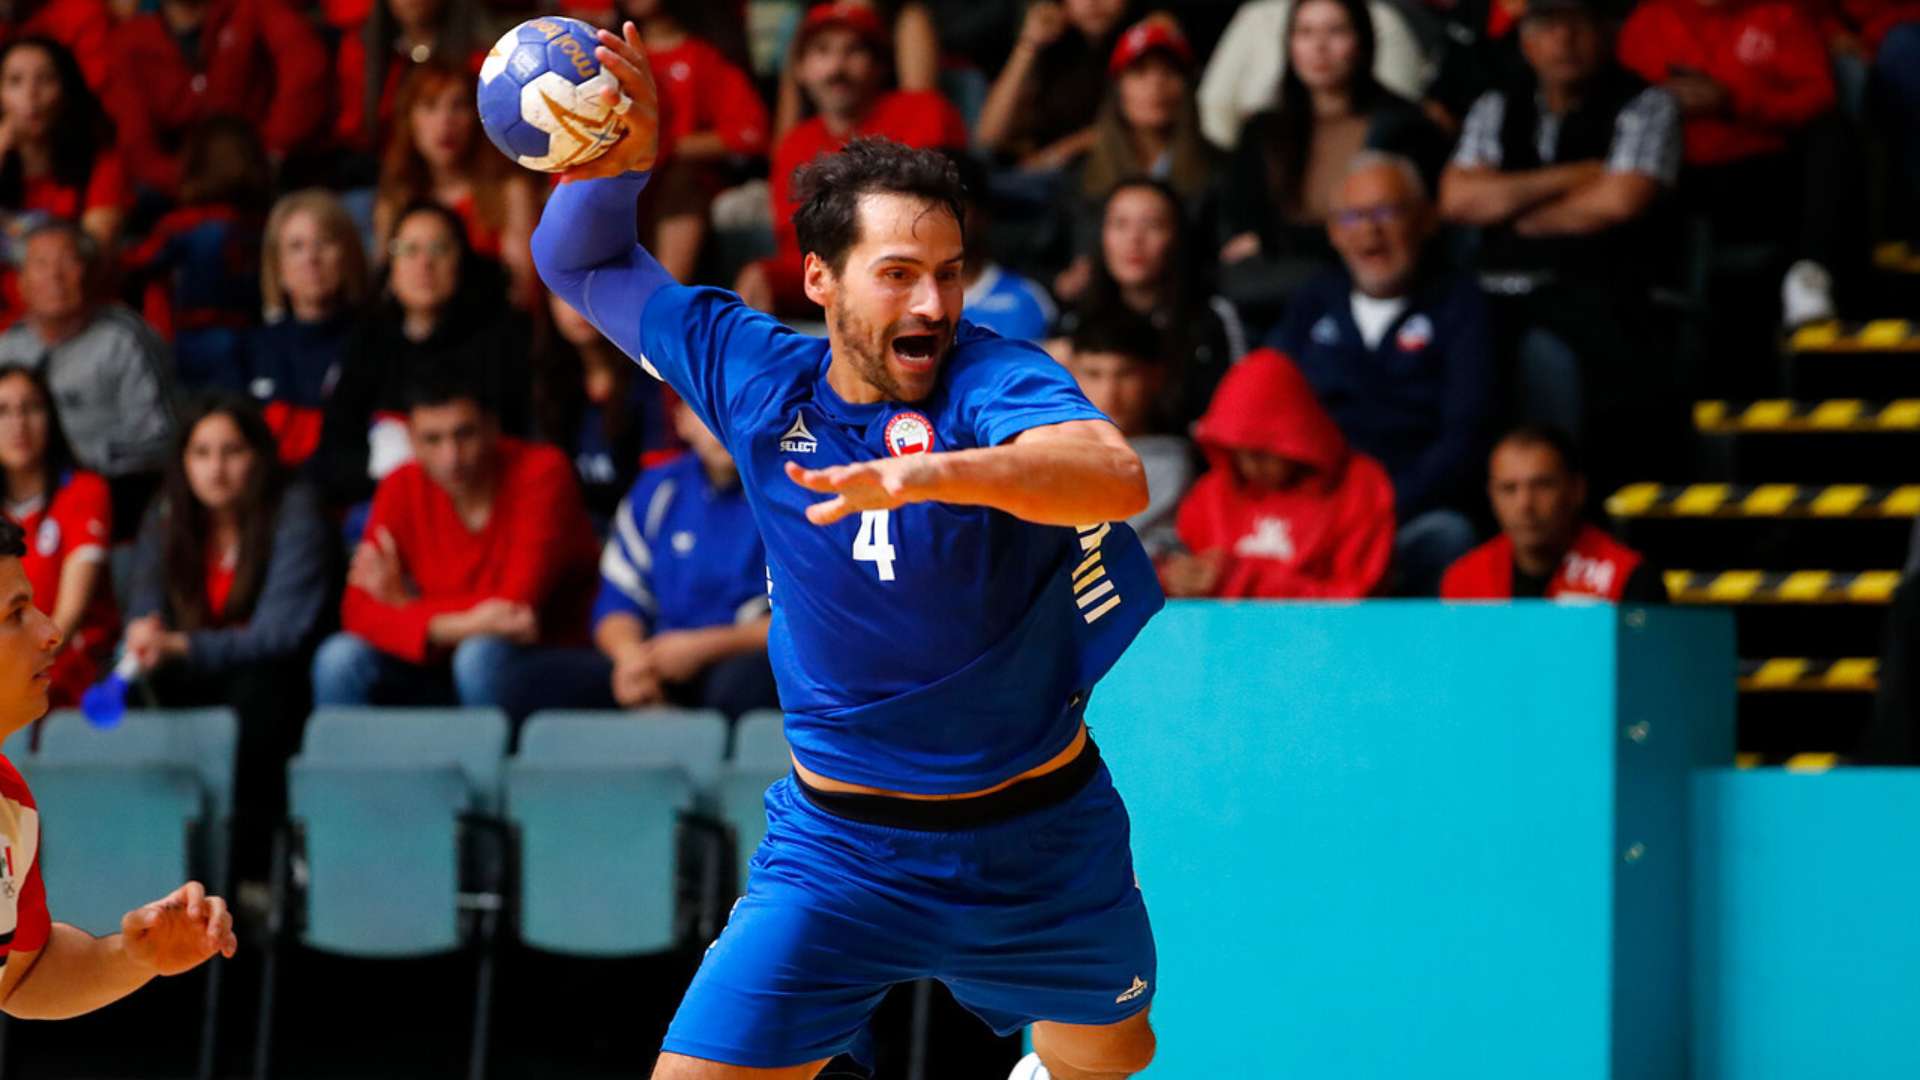 Chile earns respect against Mexico in male’s handball